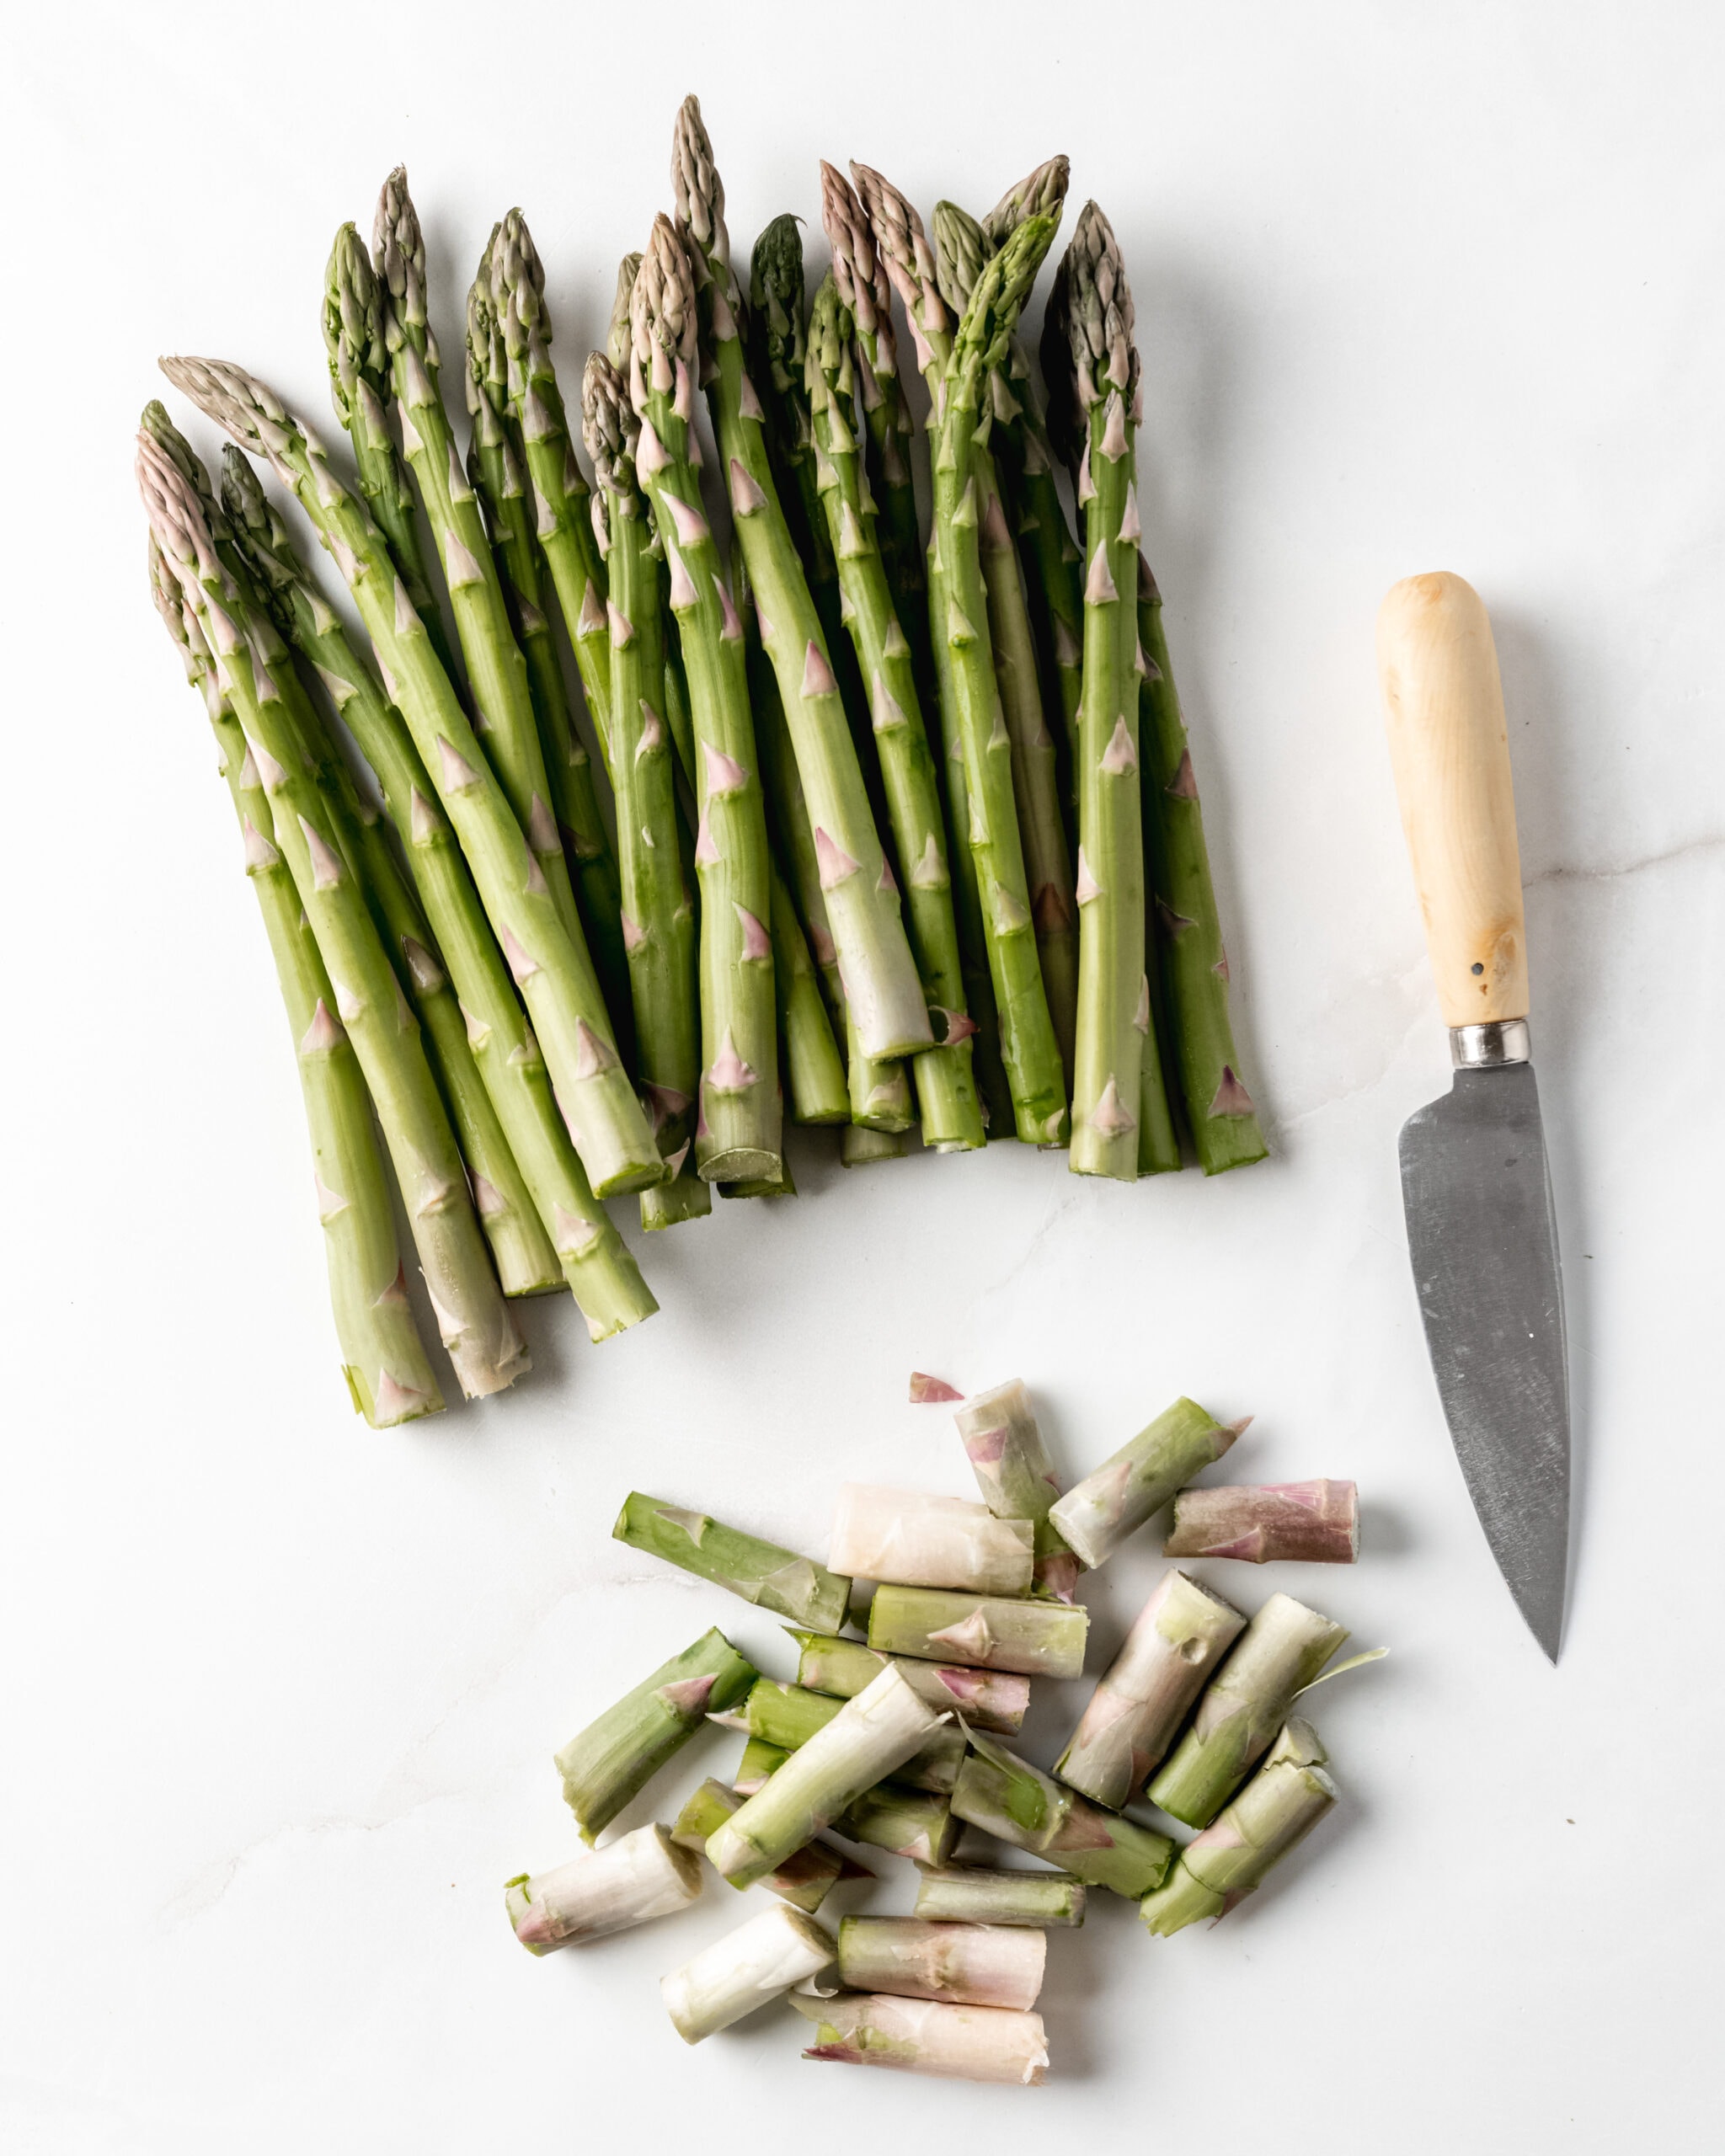 Asparagus with woody ends trimmed and a paring knife.